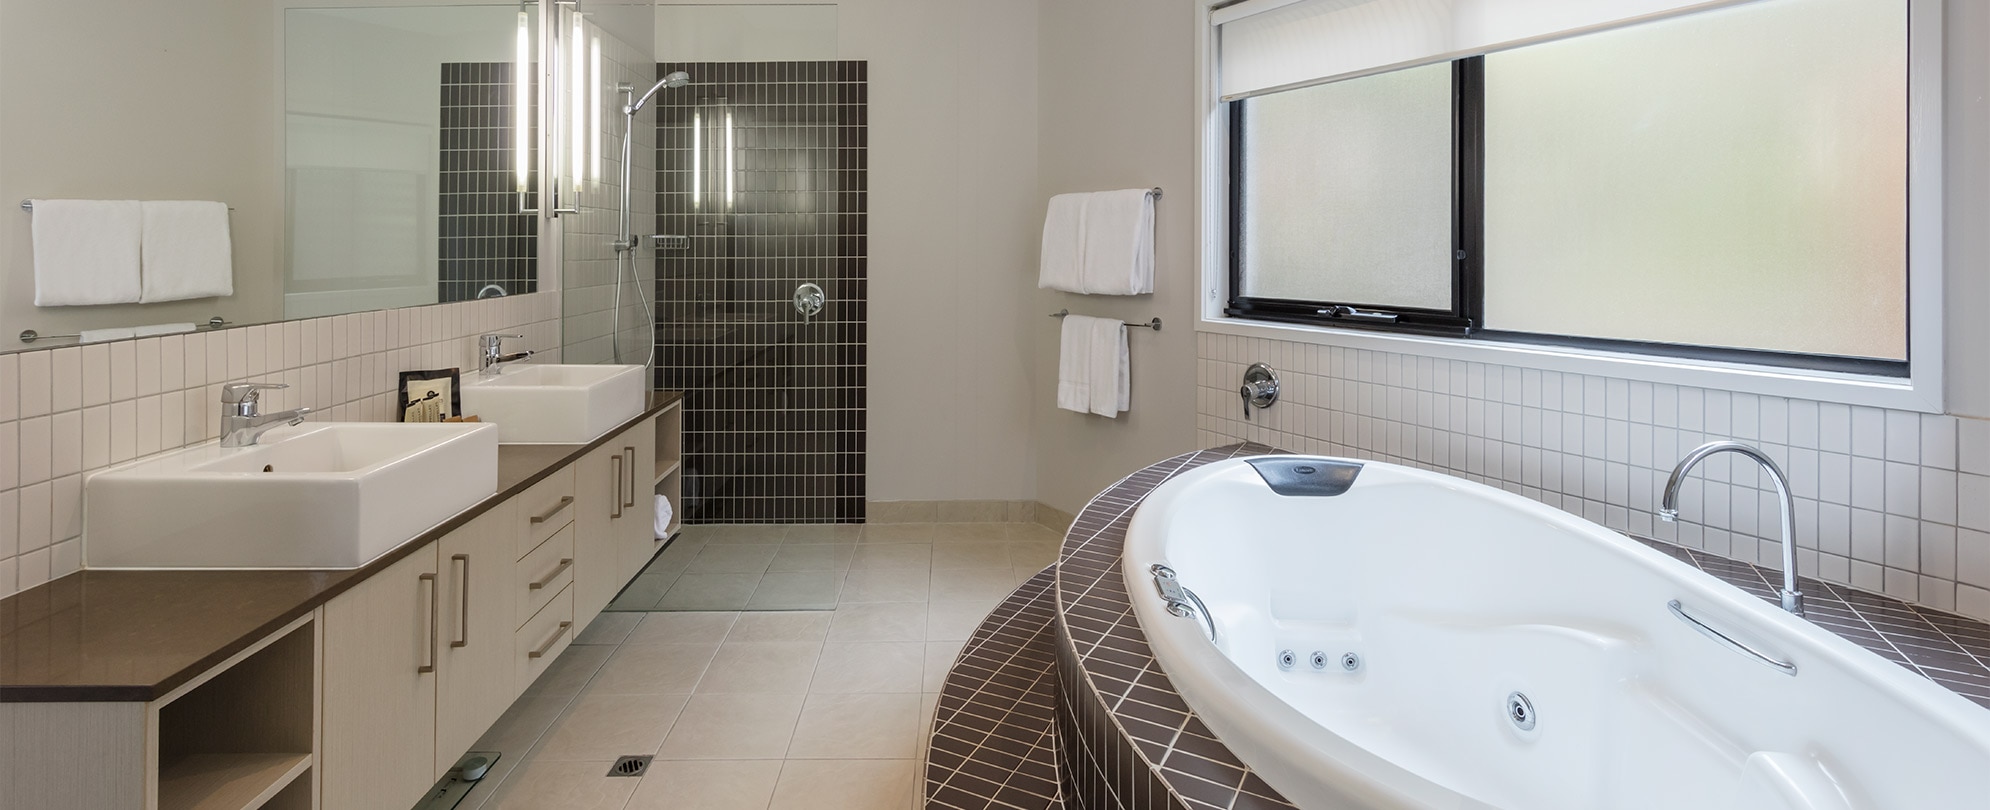 The master bathroom of a presidential reserve suite at Club Wyndham Seven Mile Beach.